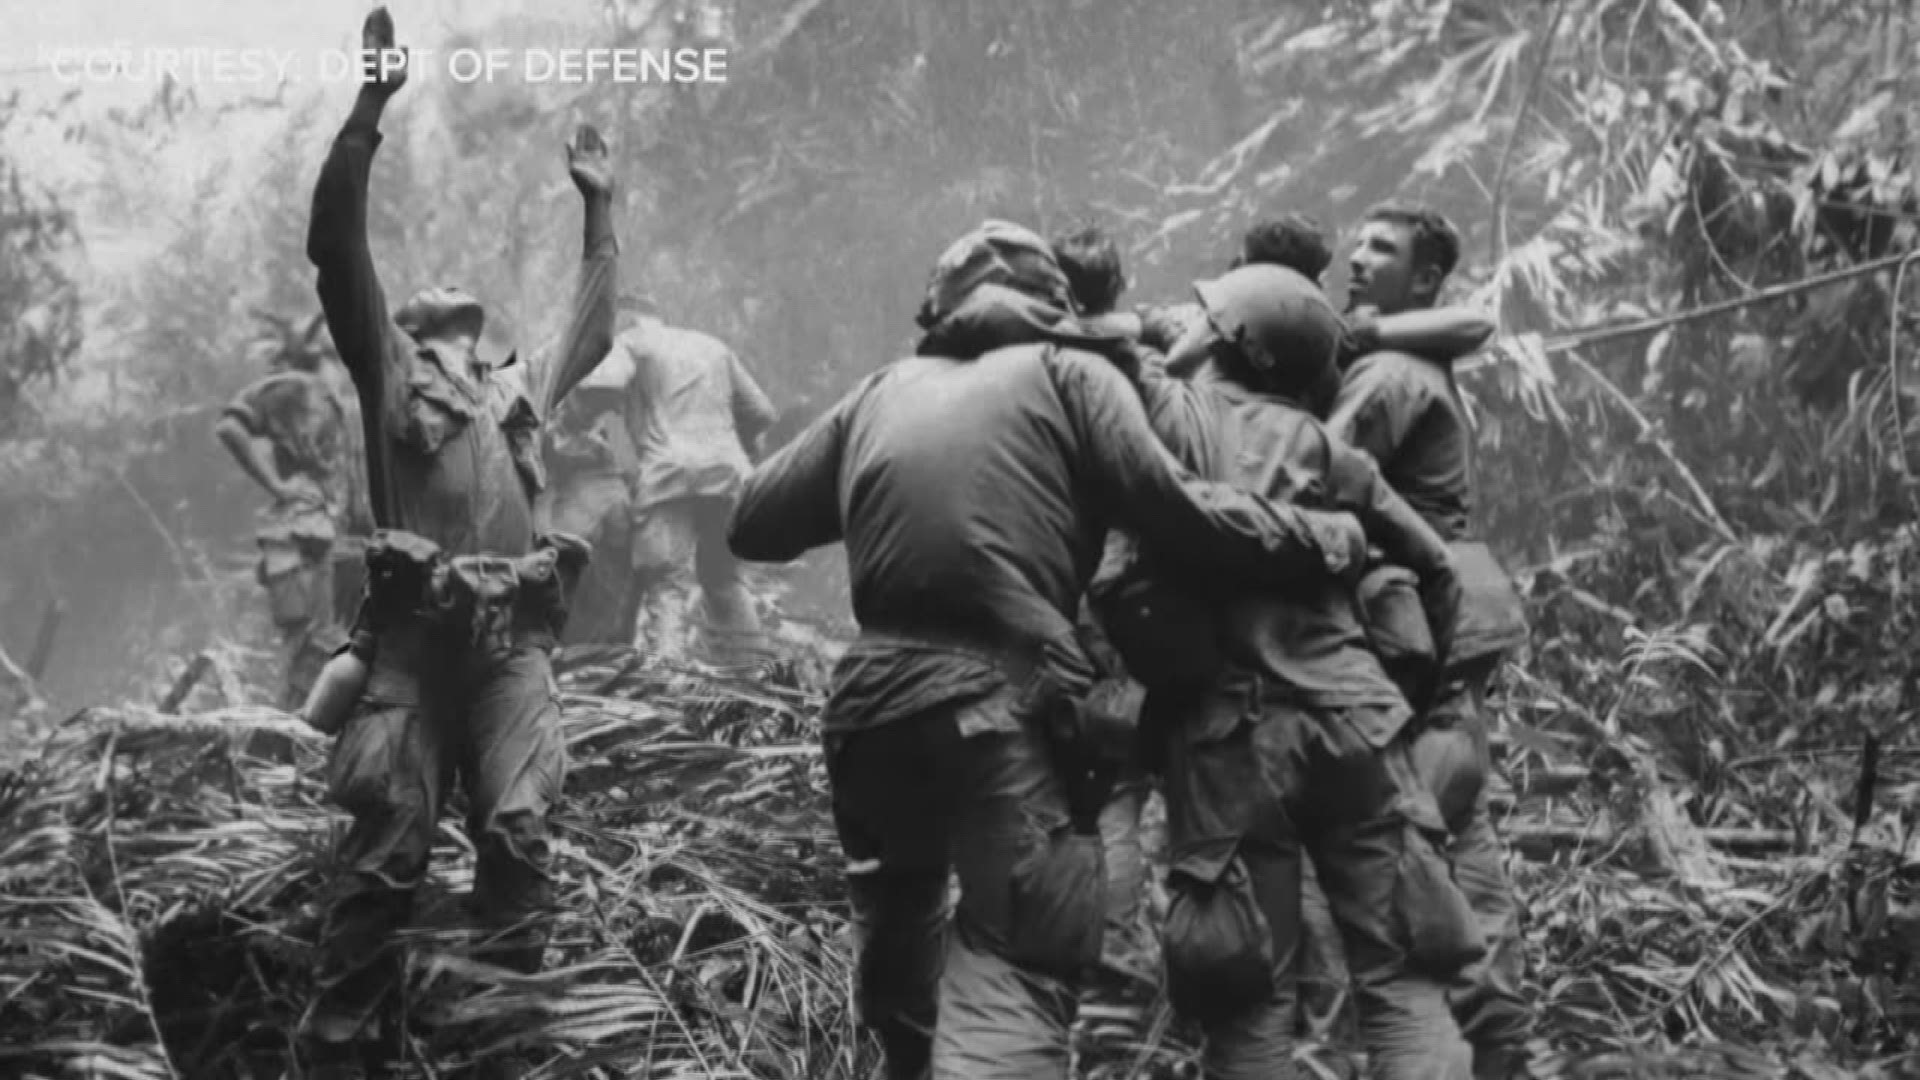 A San Antonio man's neighbor's Vietnam War experiences is being recounted in the new movie "The Last Full Measure." But a misunderstanding led to off-screen drama.